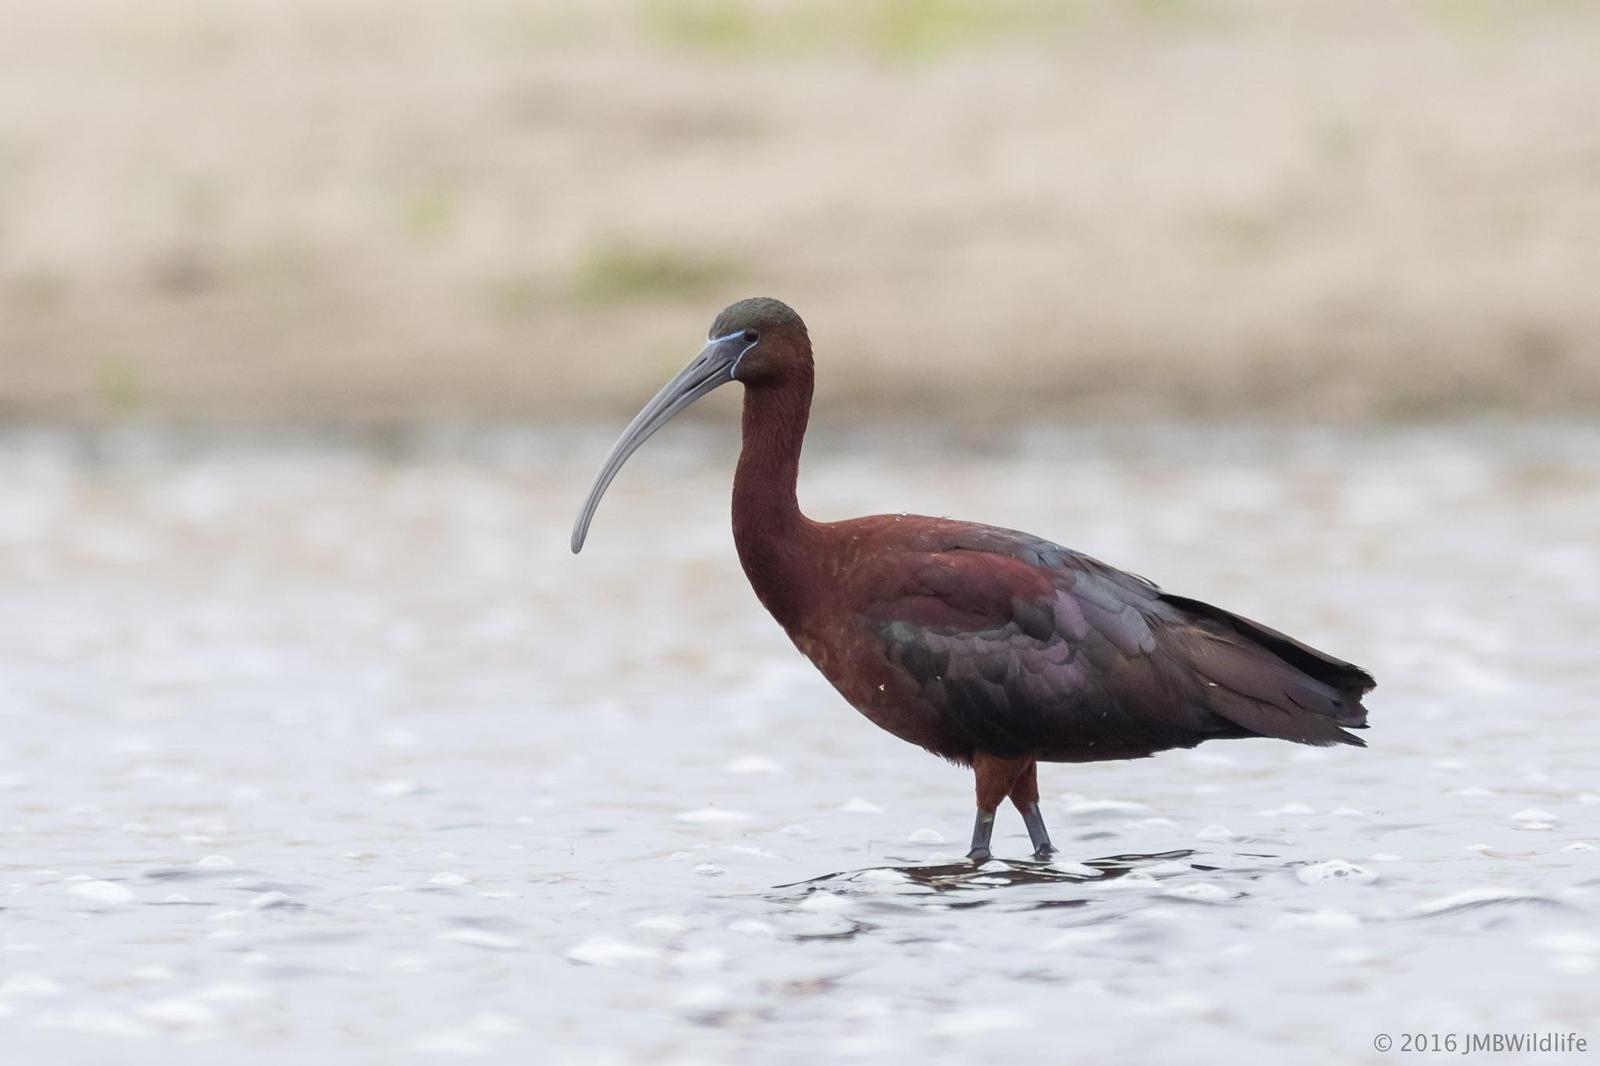 Glossy Ibis Photo by Jeff Bray